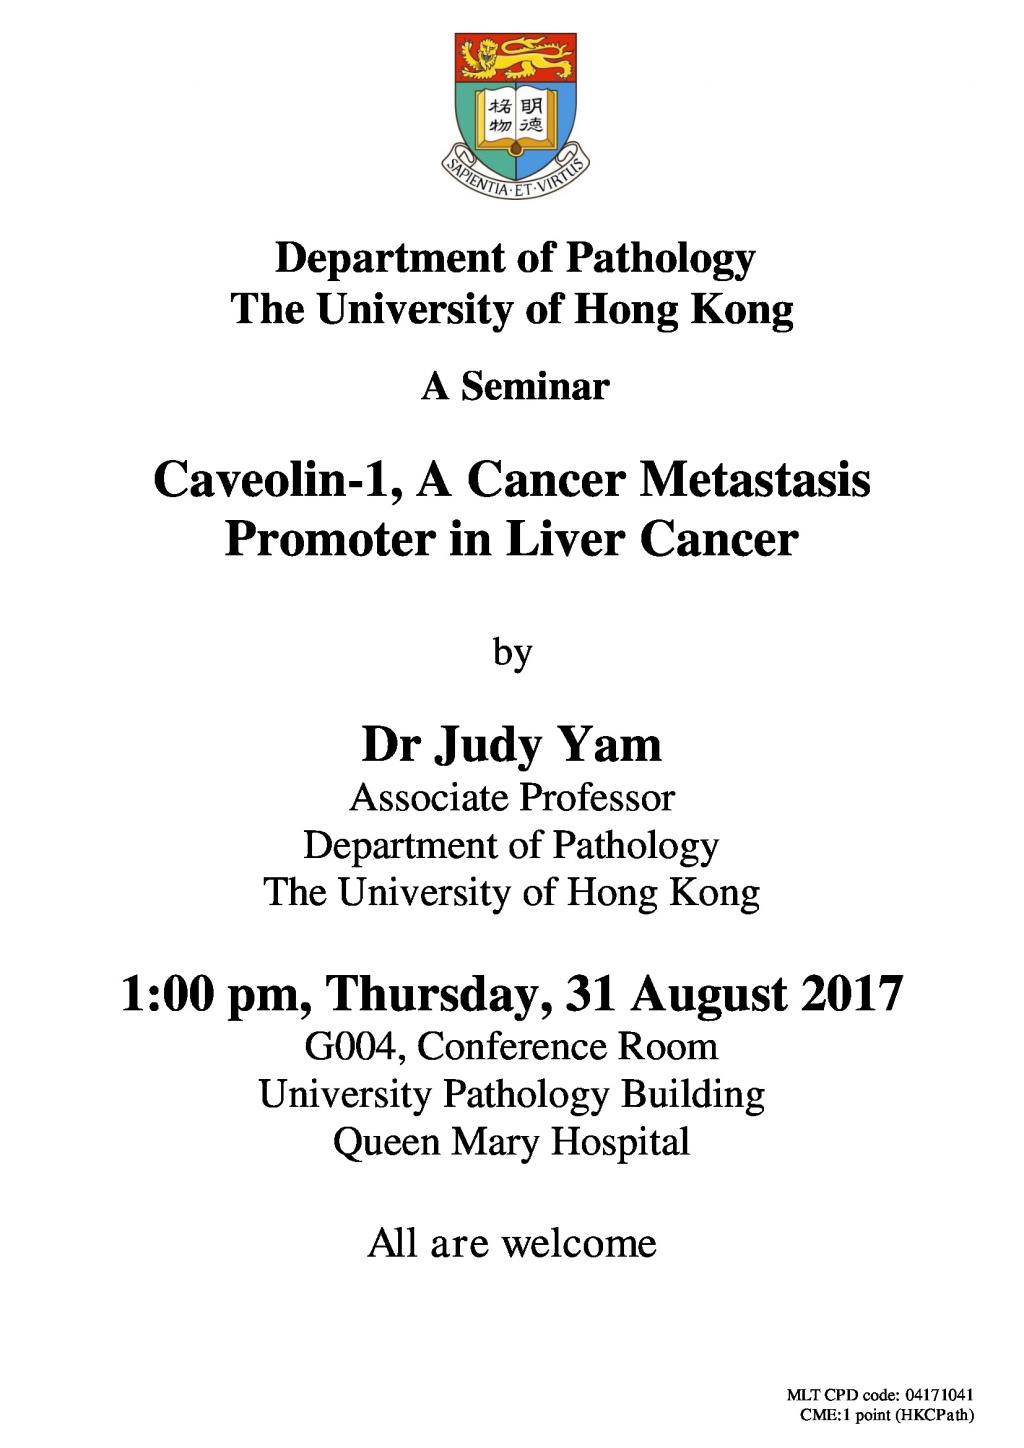 A Seminar  Caveolin-1, A Cancer Metastasis Promoter in Liver Cancer by Dr Judy Yam on 31 Aug